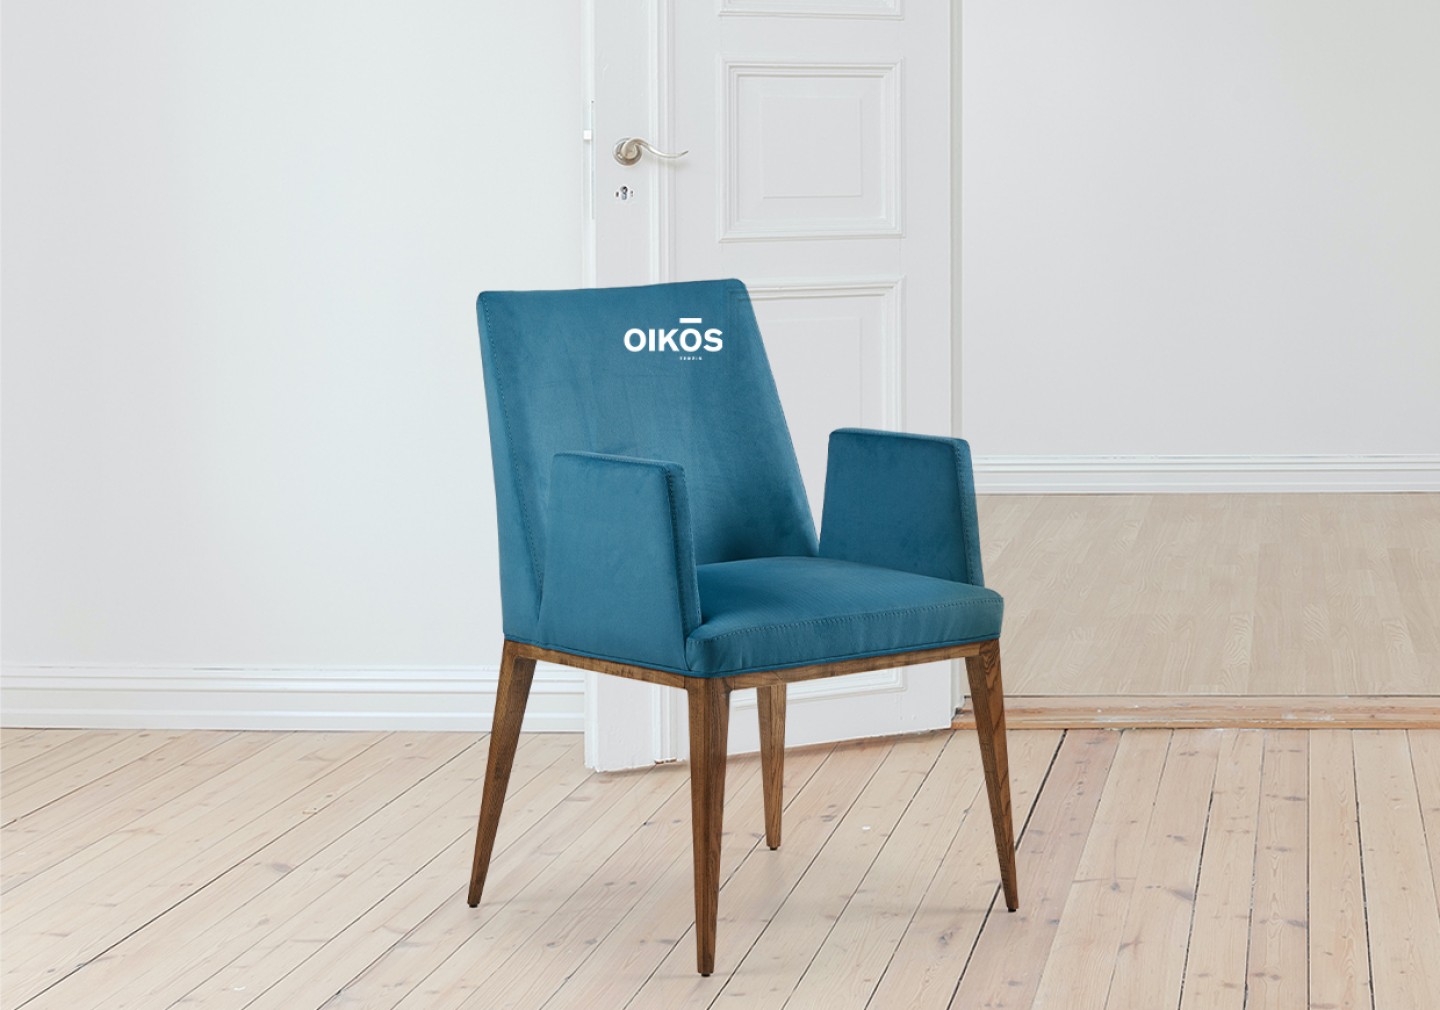 THE CHANTAL DINING CHAIR